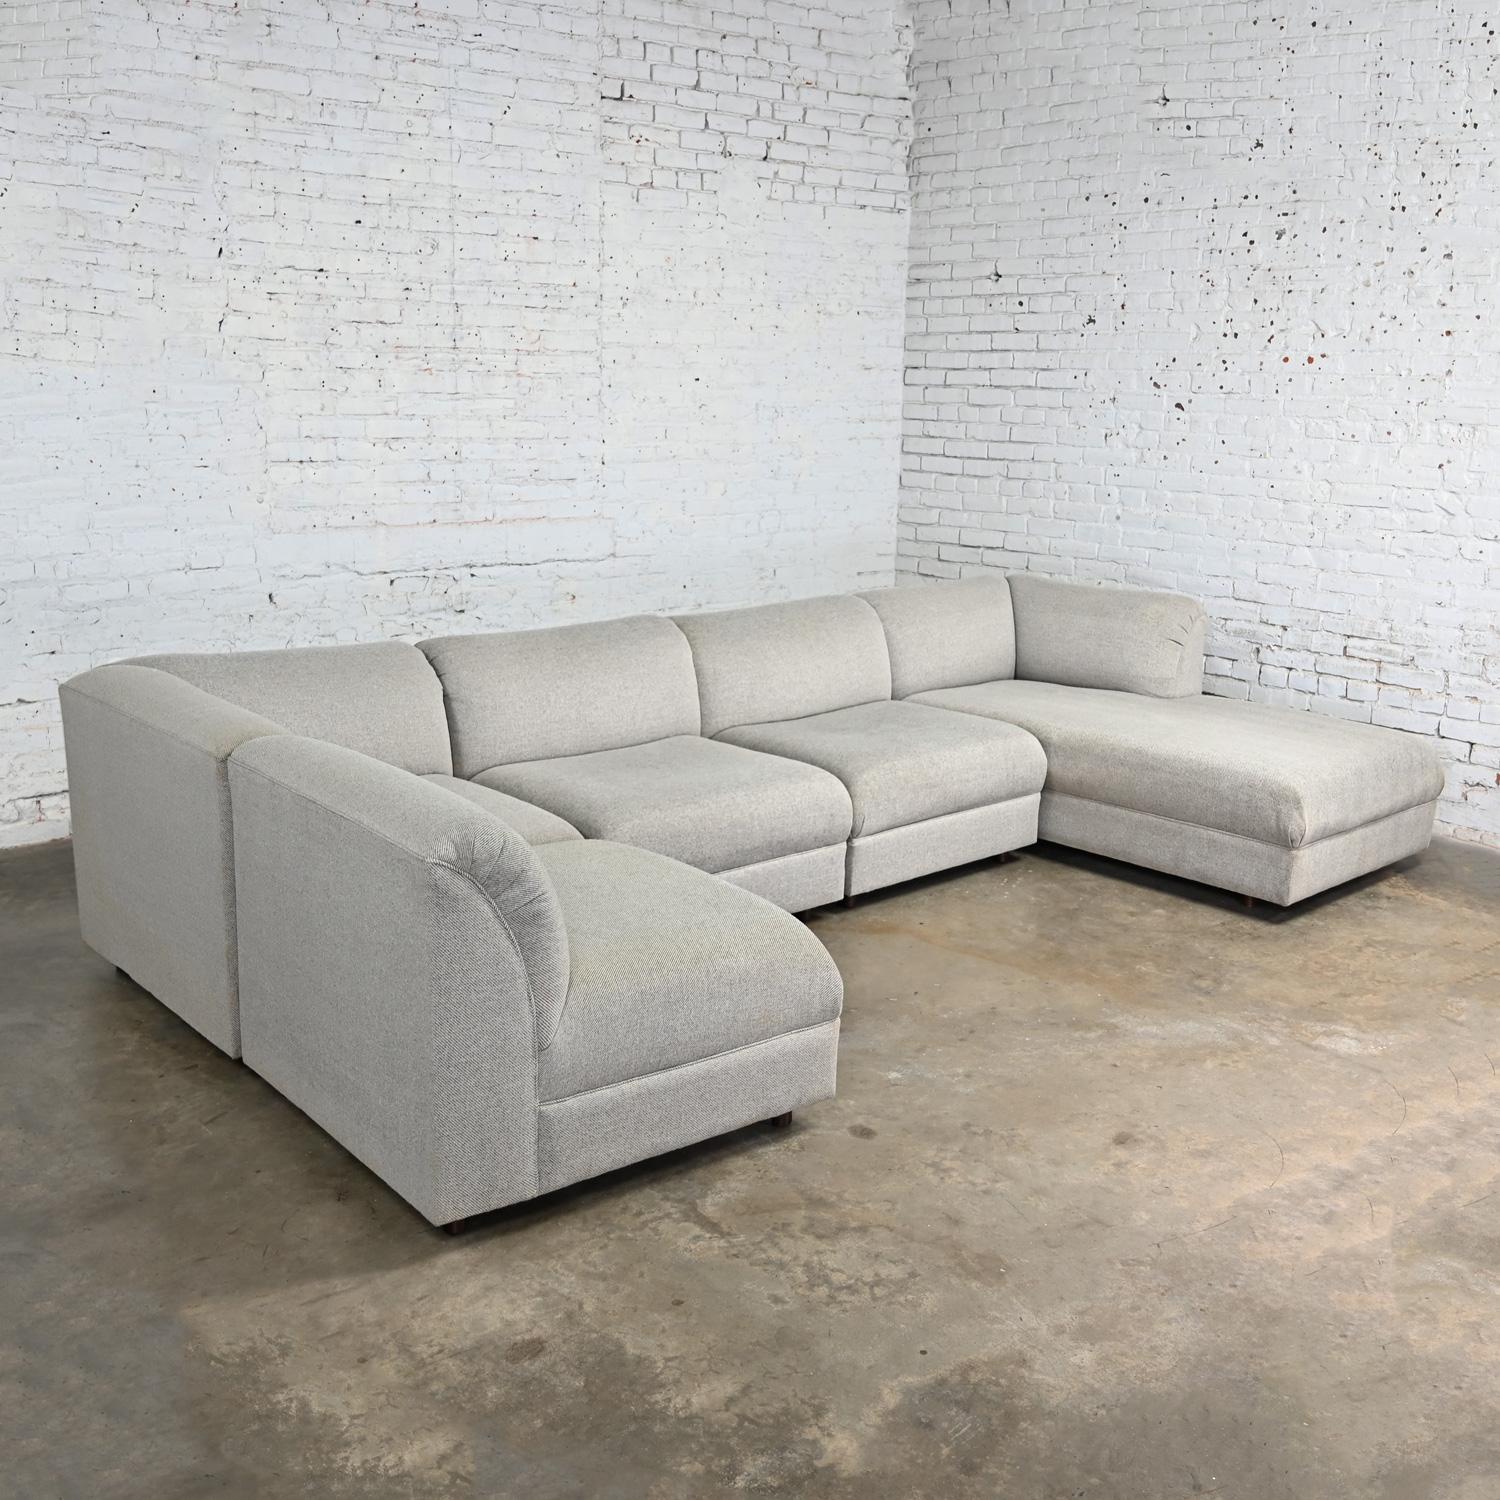 Late 20th Century Modern Modular Sectional Sofa 5 Pieces with Chaise Gray Tweed  For Sale 5